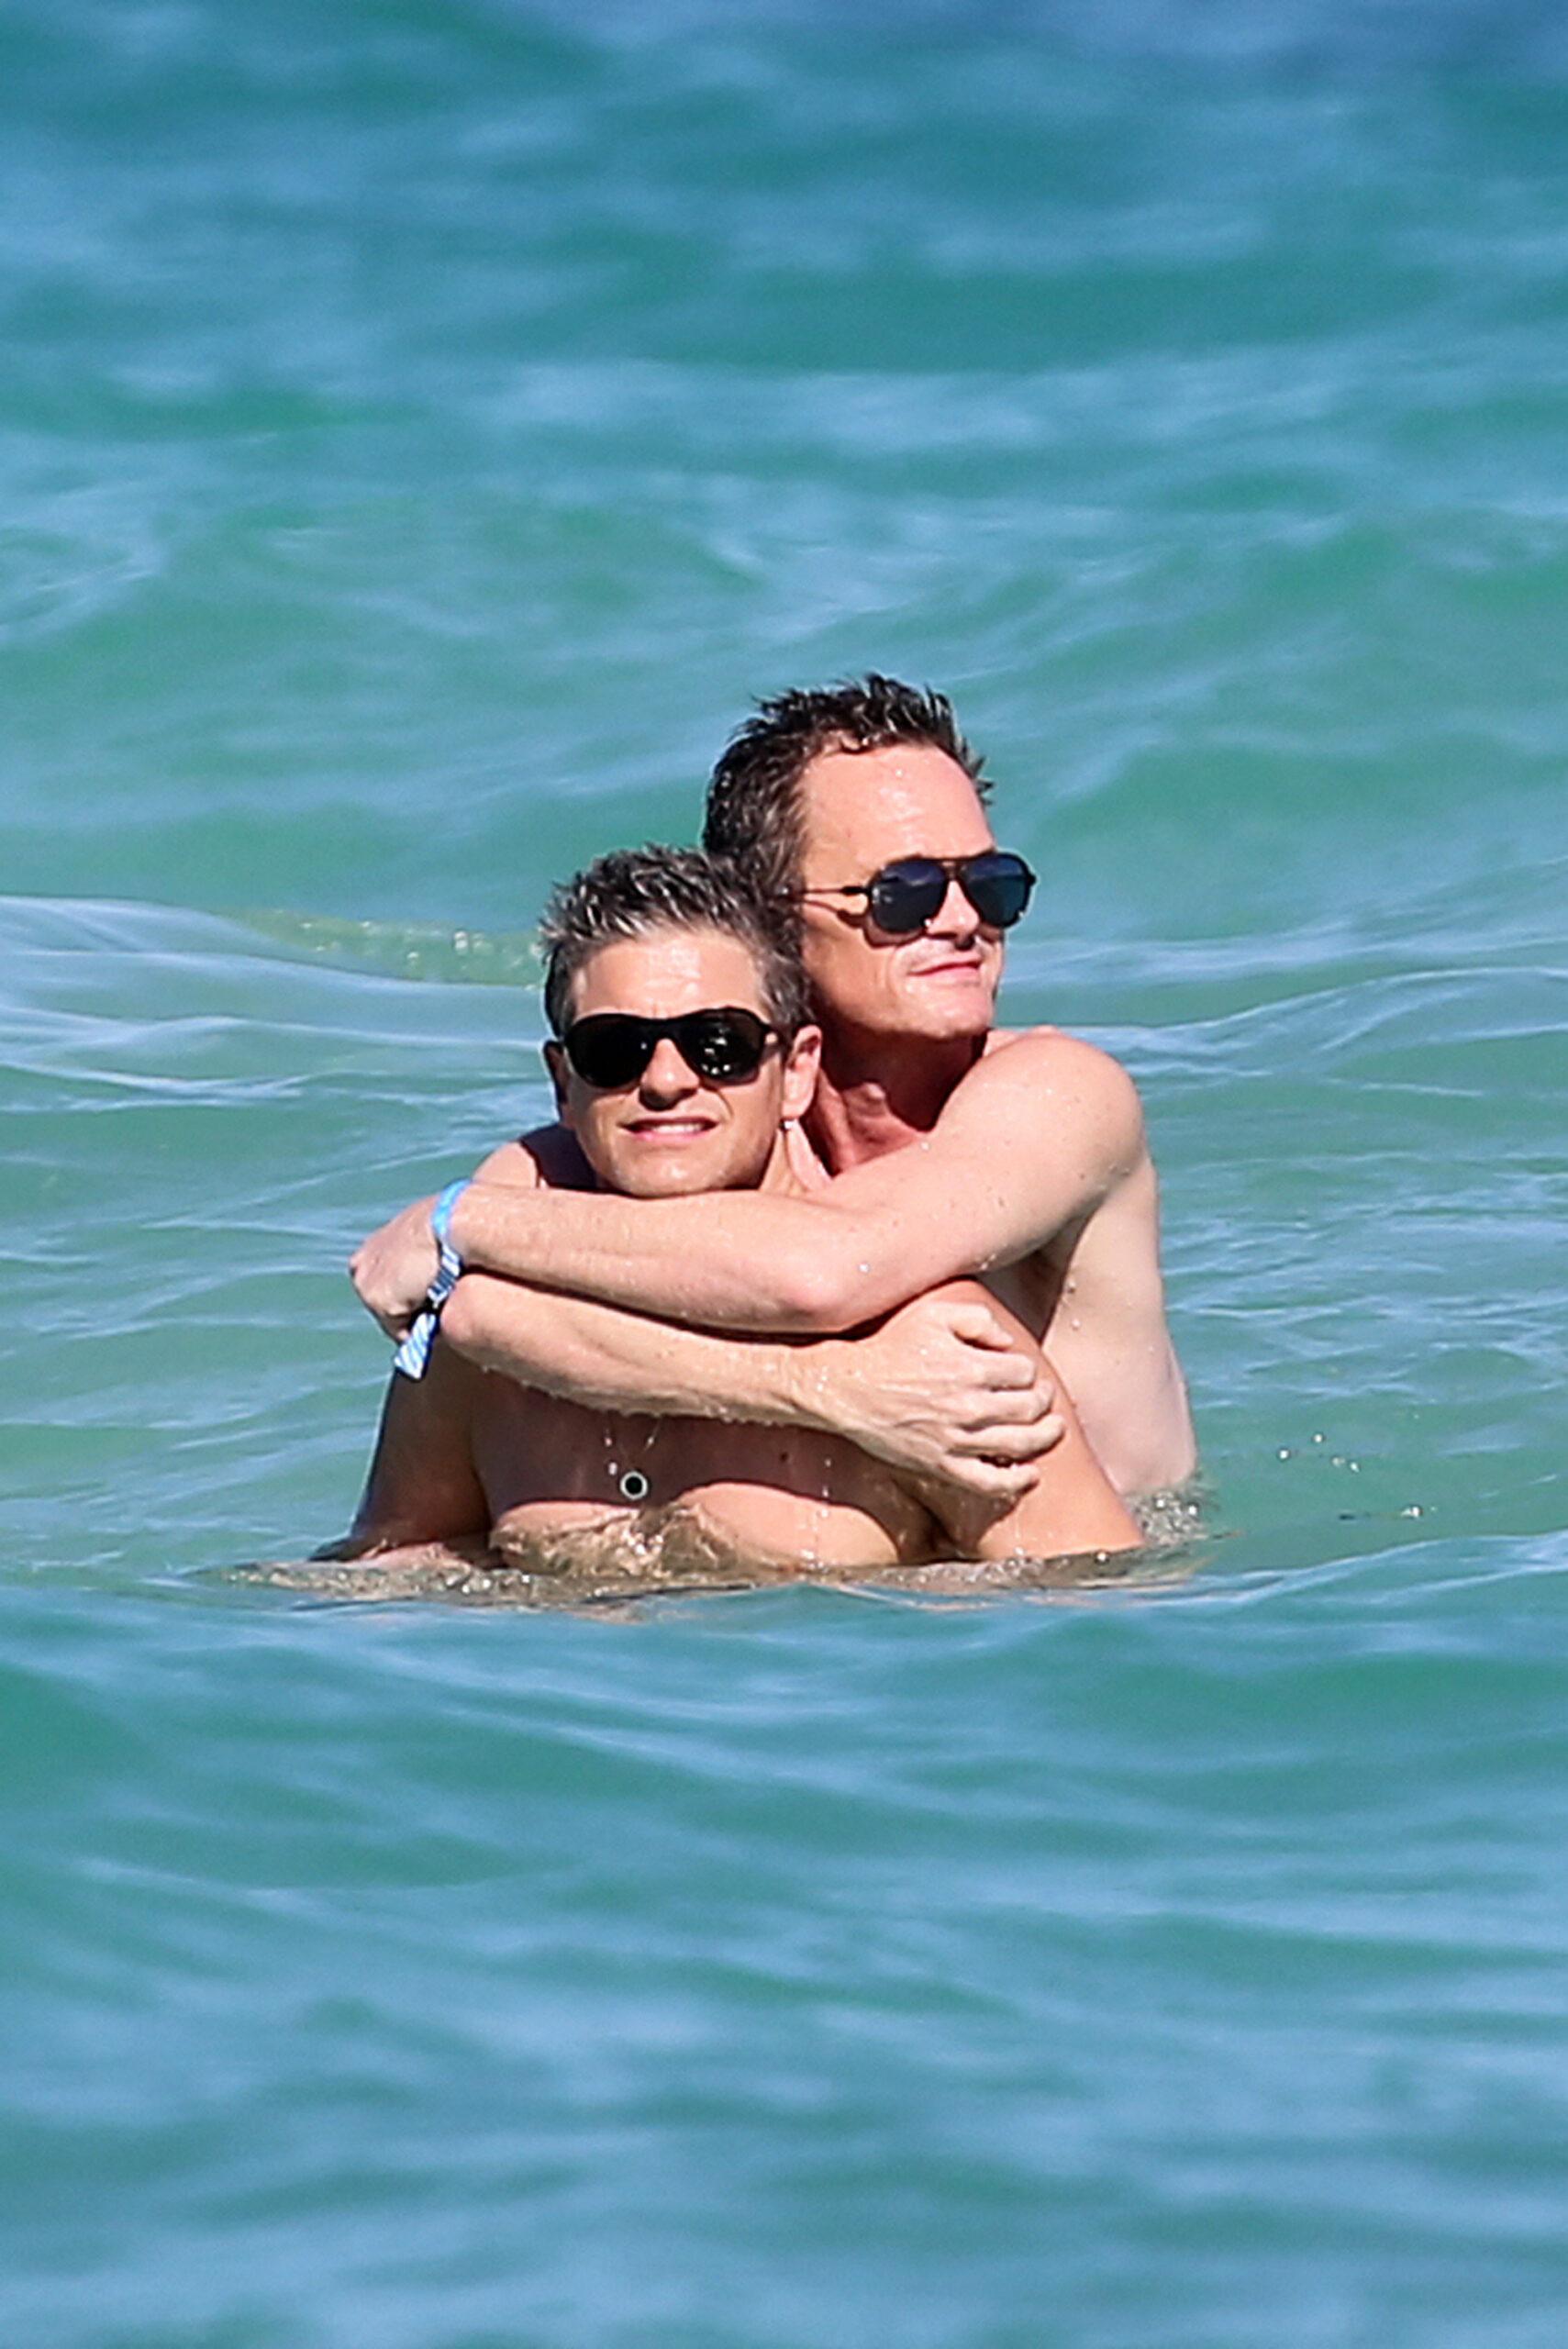 Neil Patrick Harris and David Burtka show off their beach bodies and indulge in some PDA as they hit the beach in Miami.